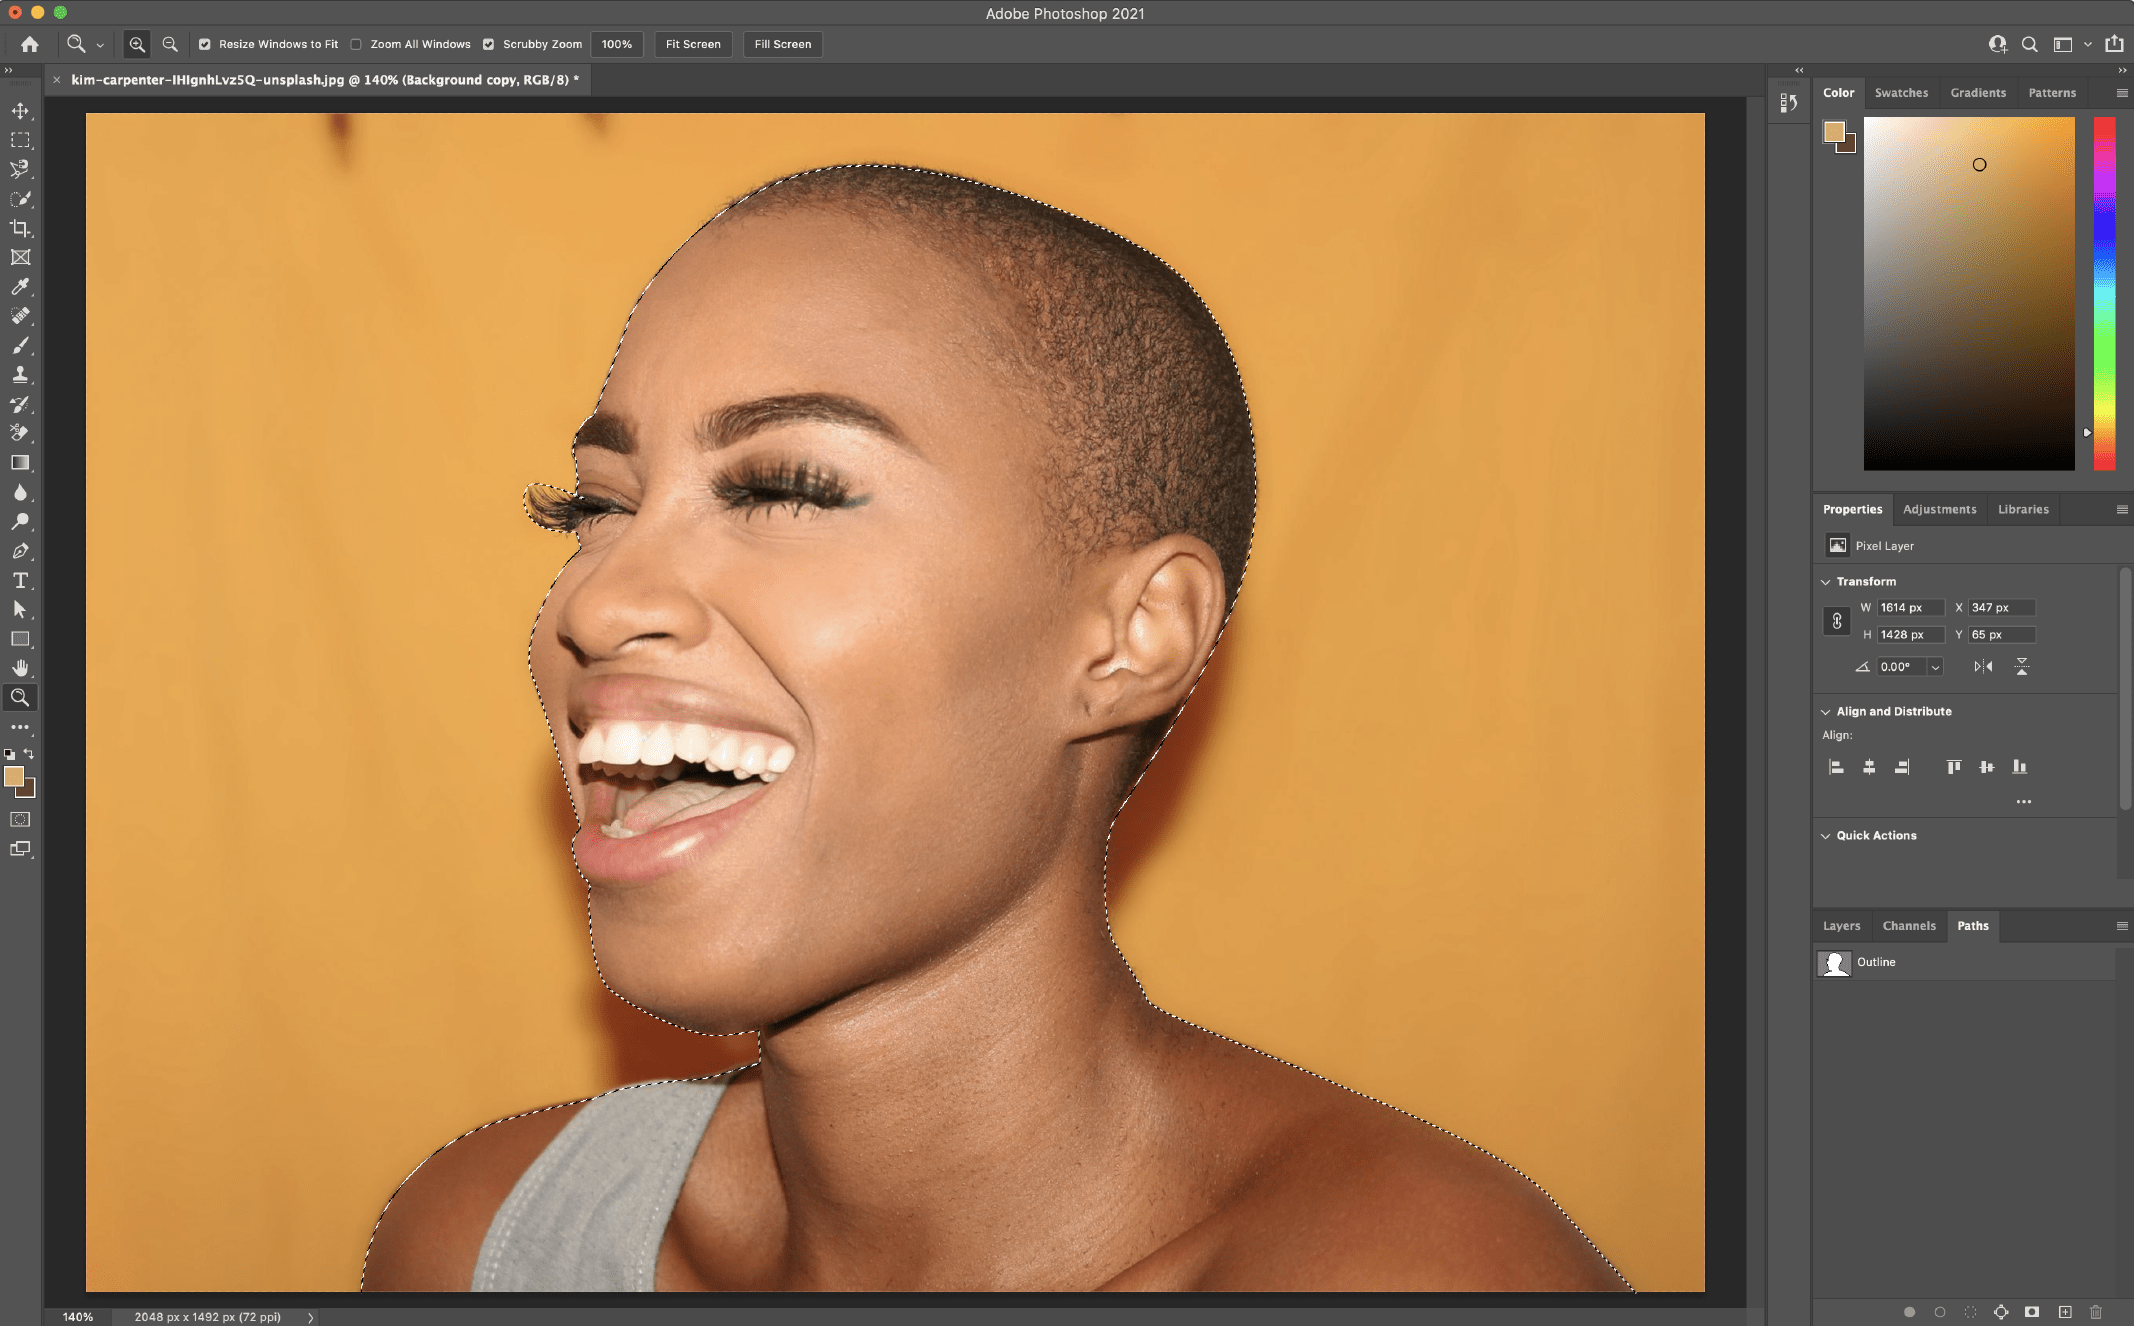 Remove Background in Photoshop using the Pen Tool